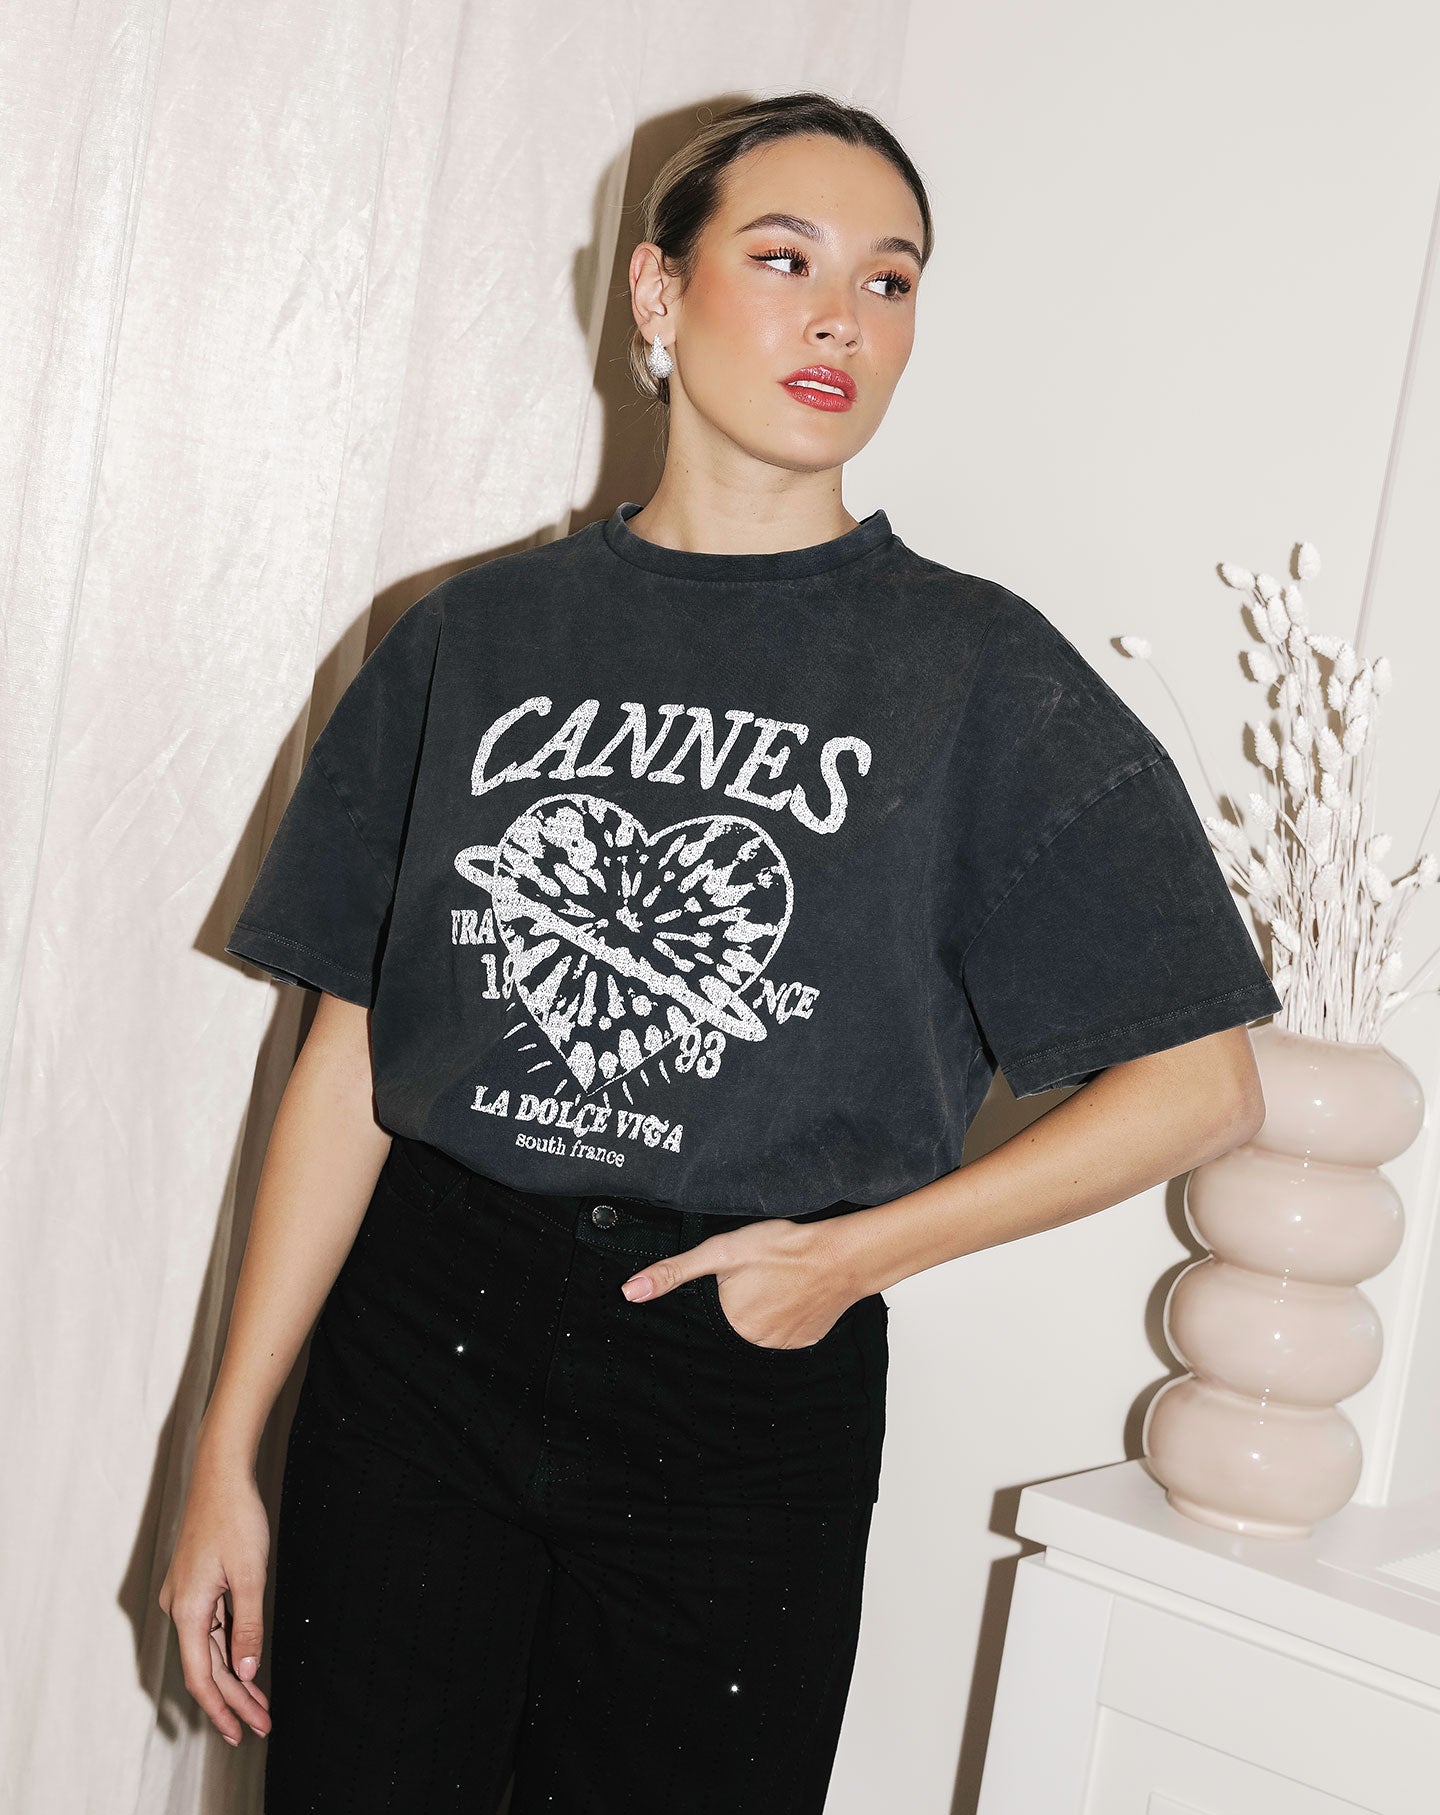 CANNES OVERSIZED TEE GRAY